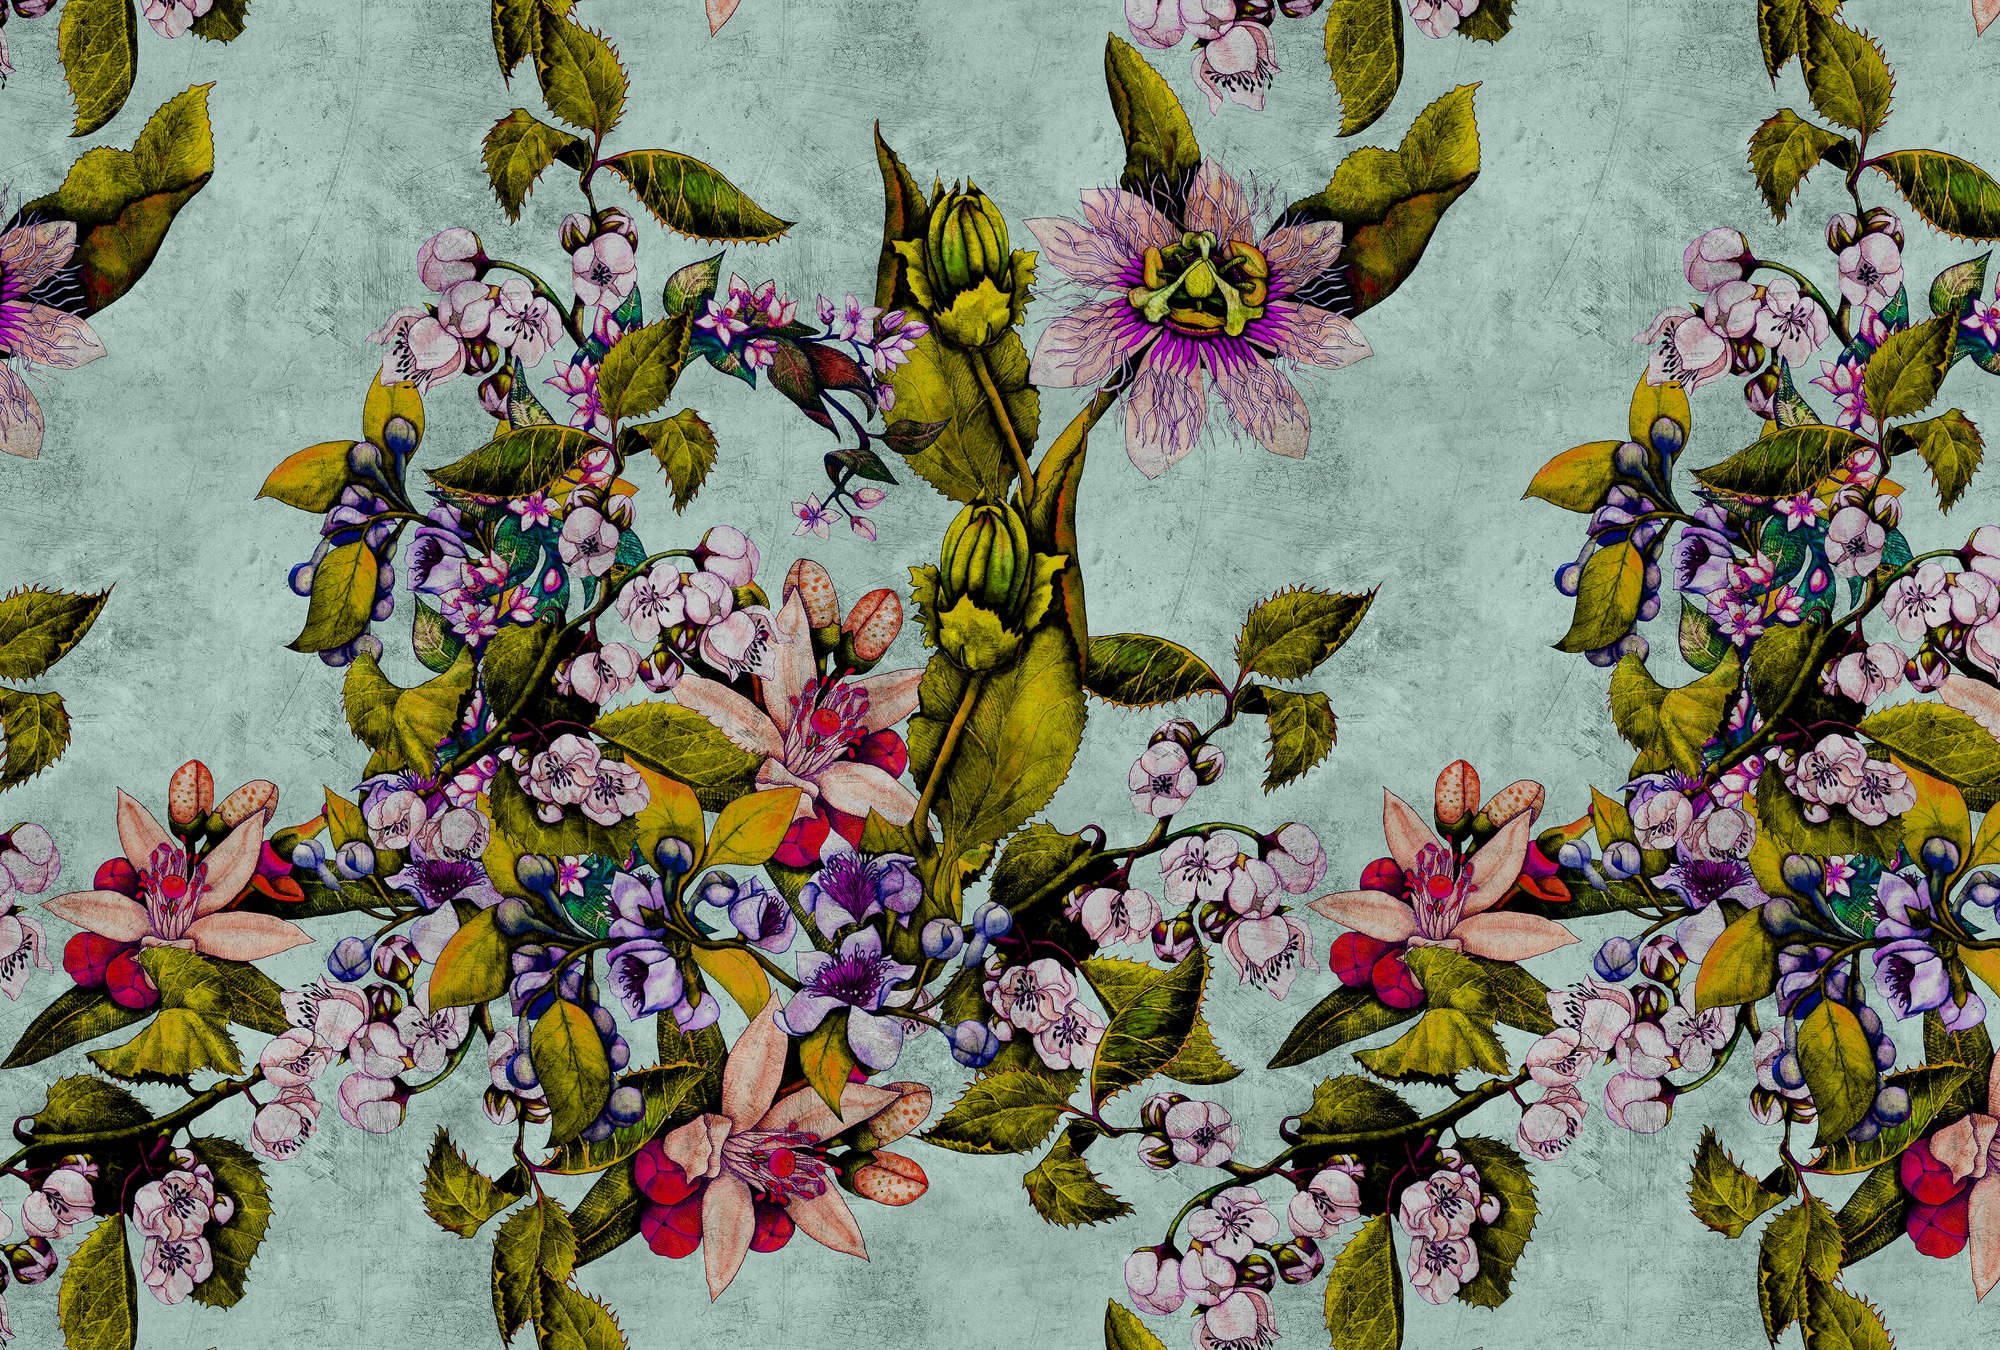             Tropical Passion 2 - Scratchy Textured Wallpaper with Blossoms and Buds - Green | Pearl Smooth Non-woven
        